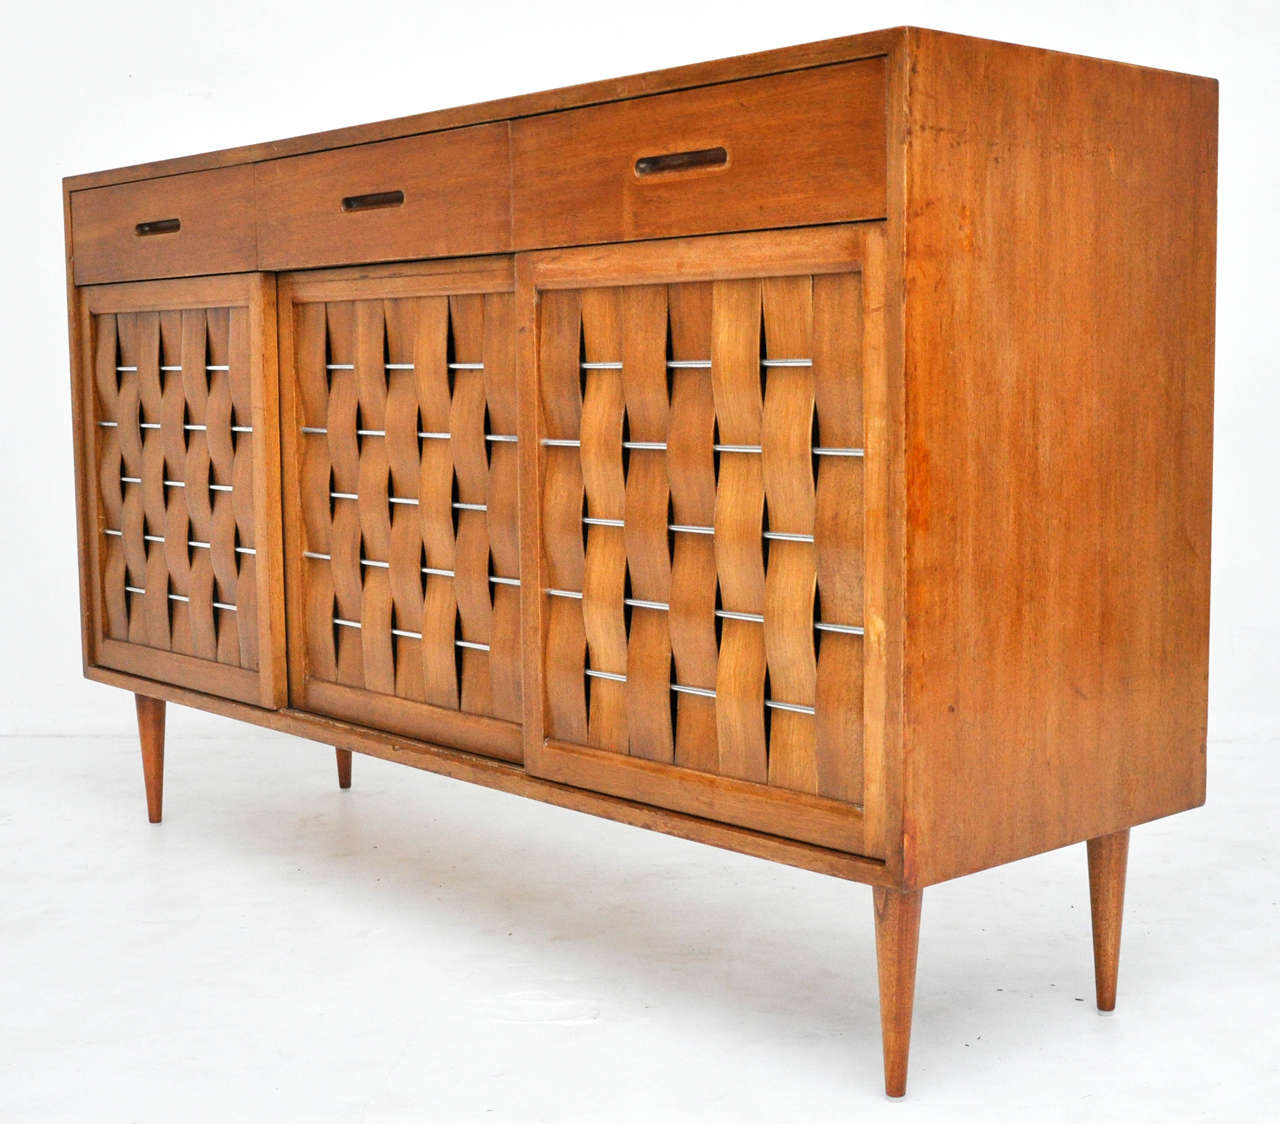 Woven-front cabinet by Edward Wormley for Dunbar. Three-door mahogany case with nickel details.